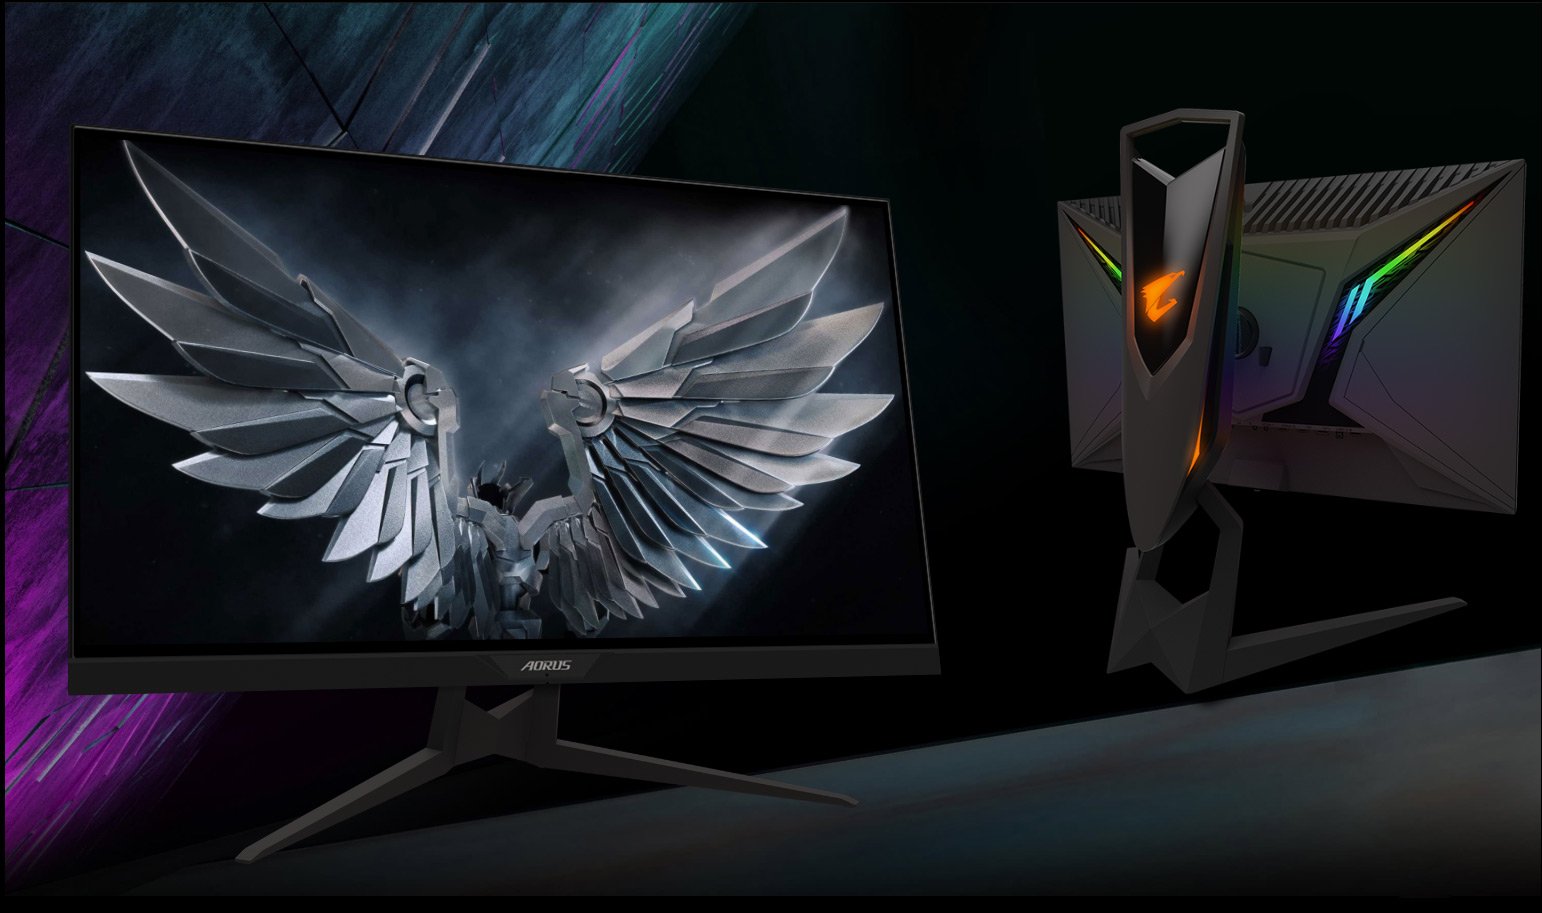 a robot bird as screenshot of monitor, and a back of the monitor